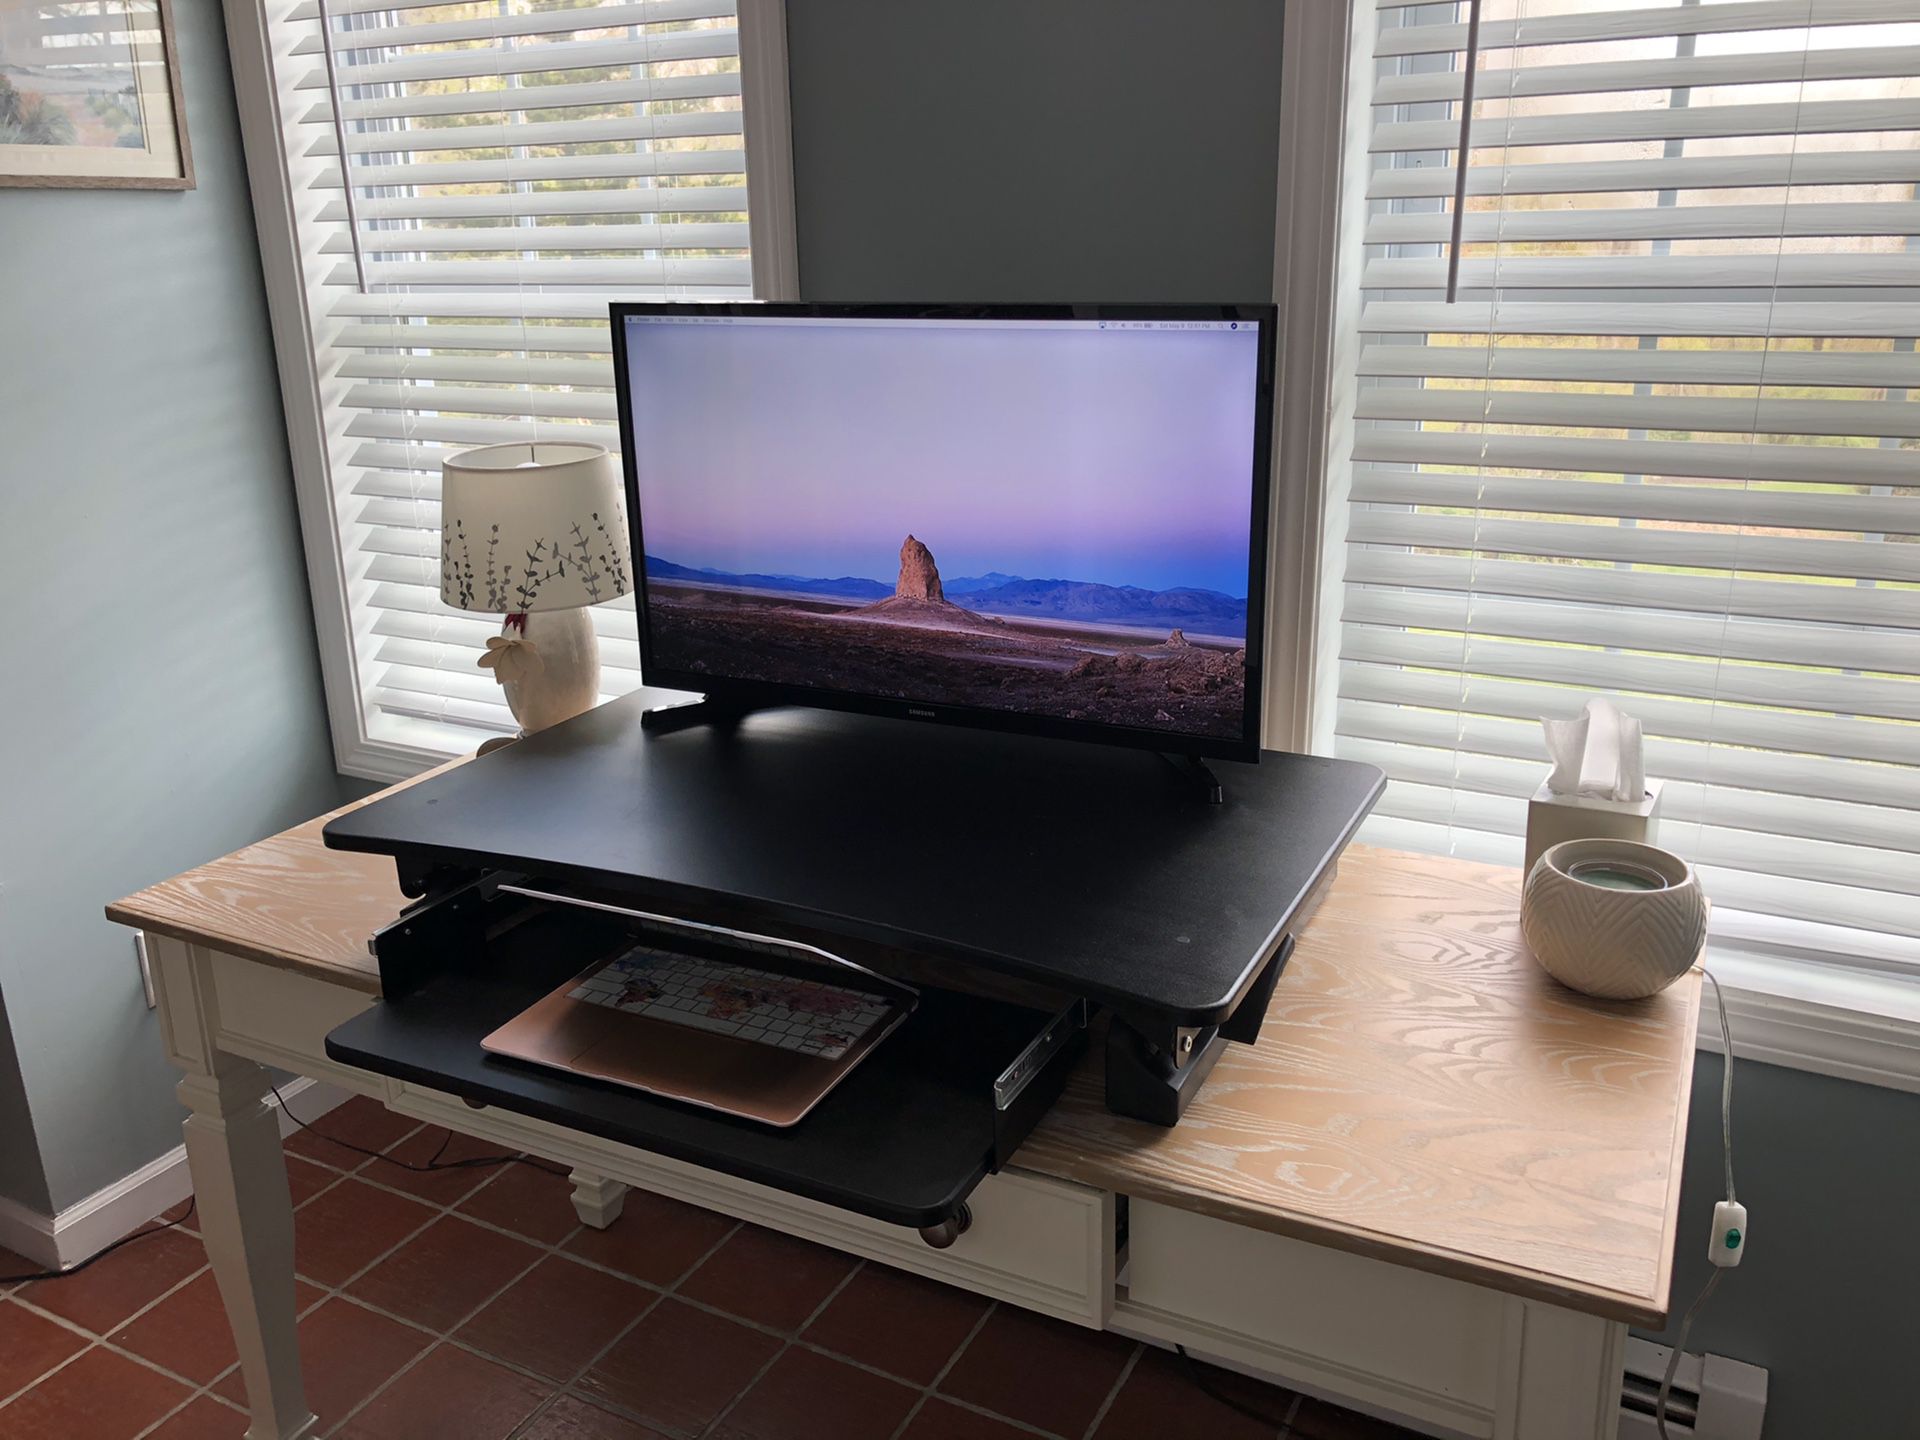 Stand up desk